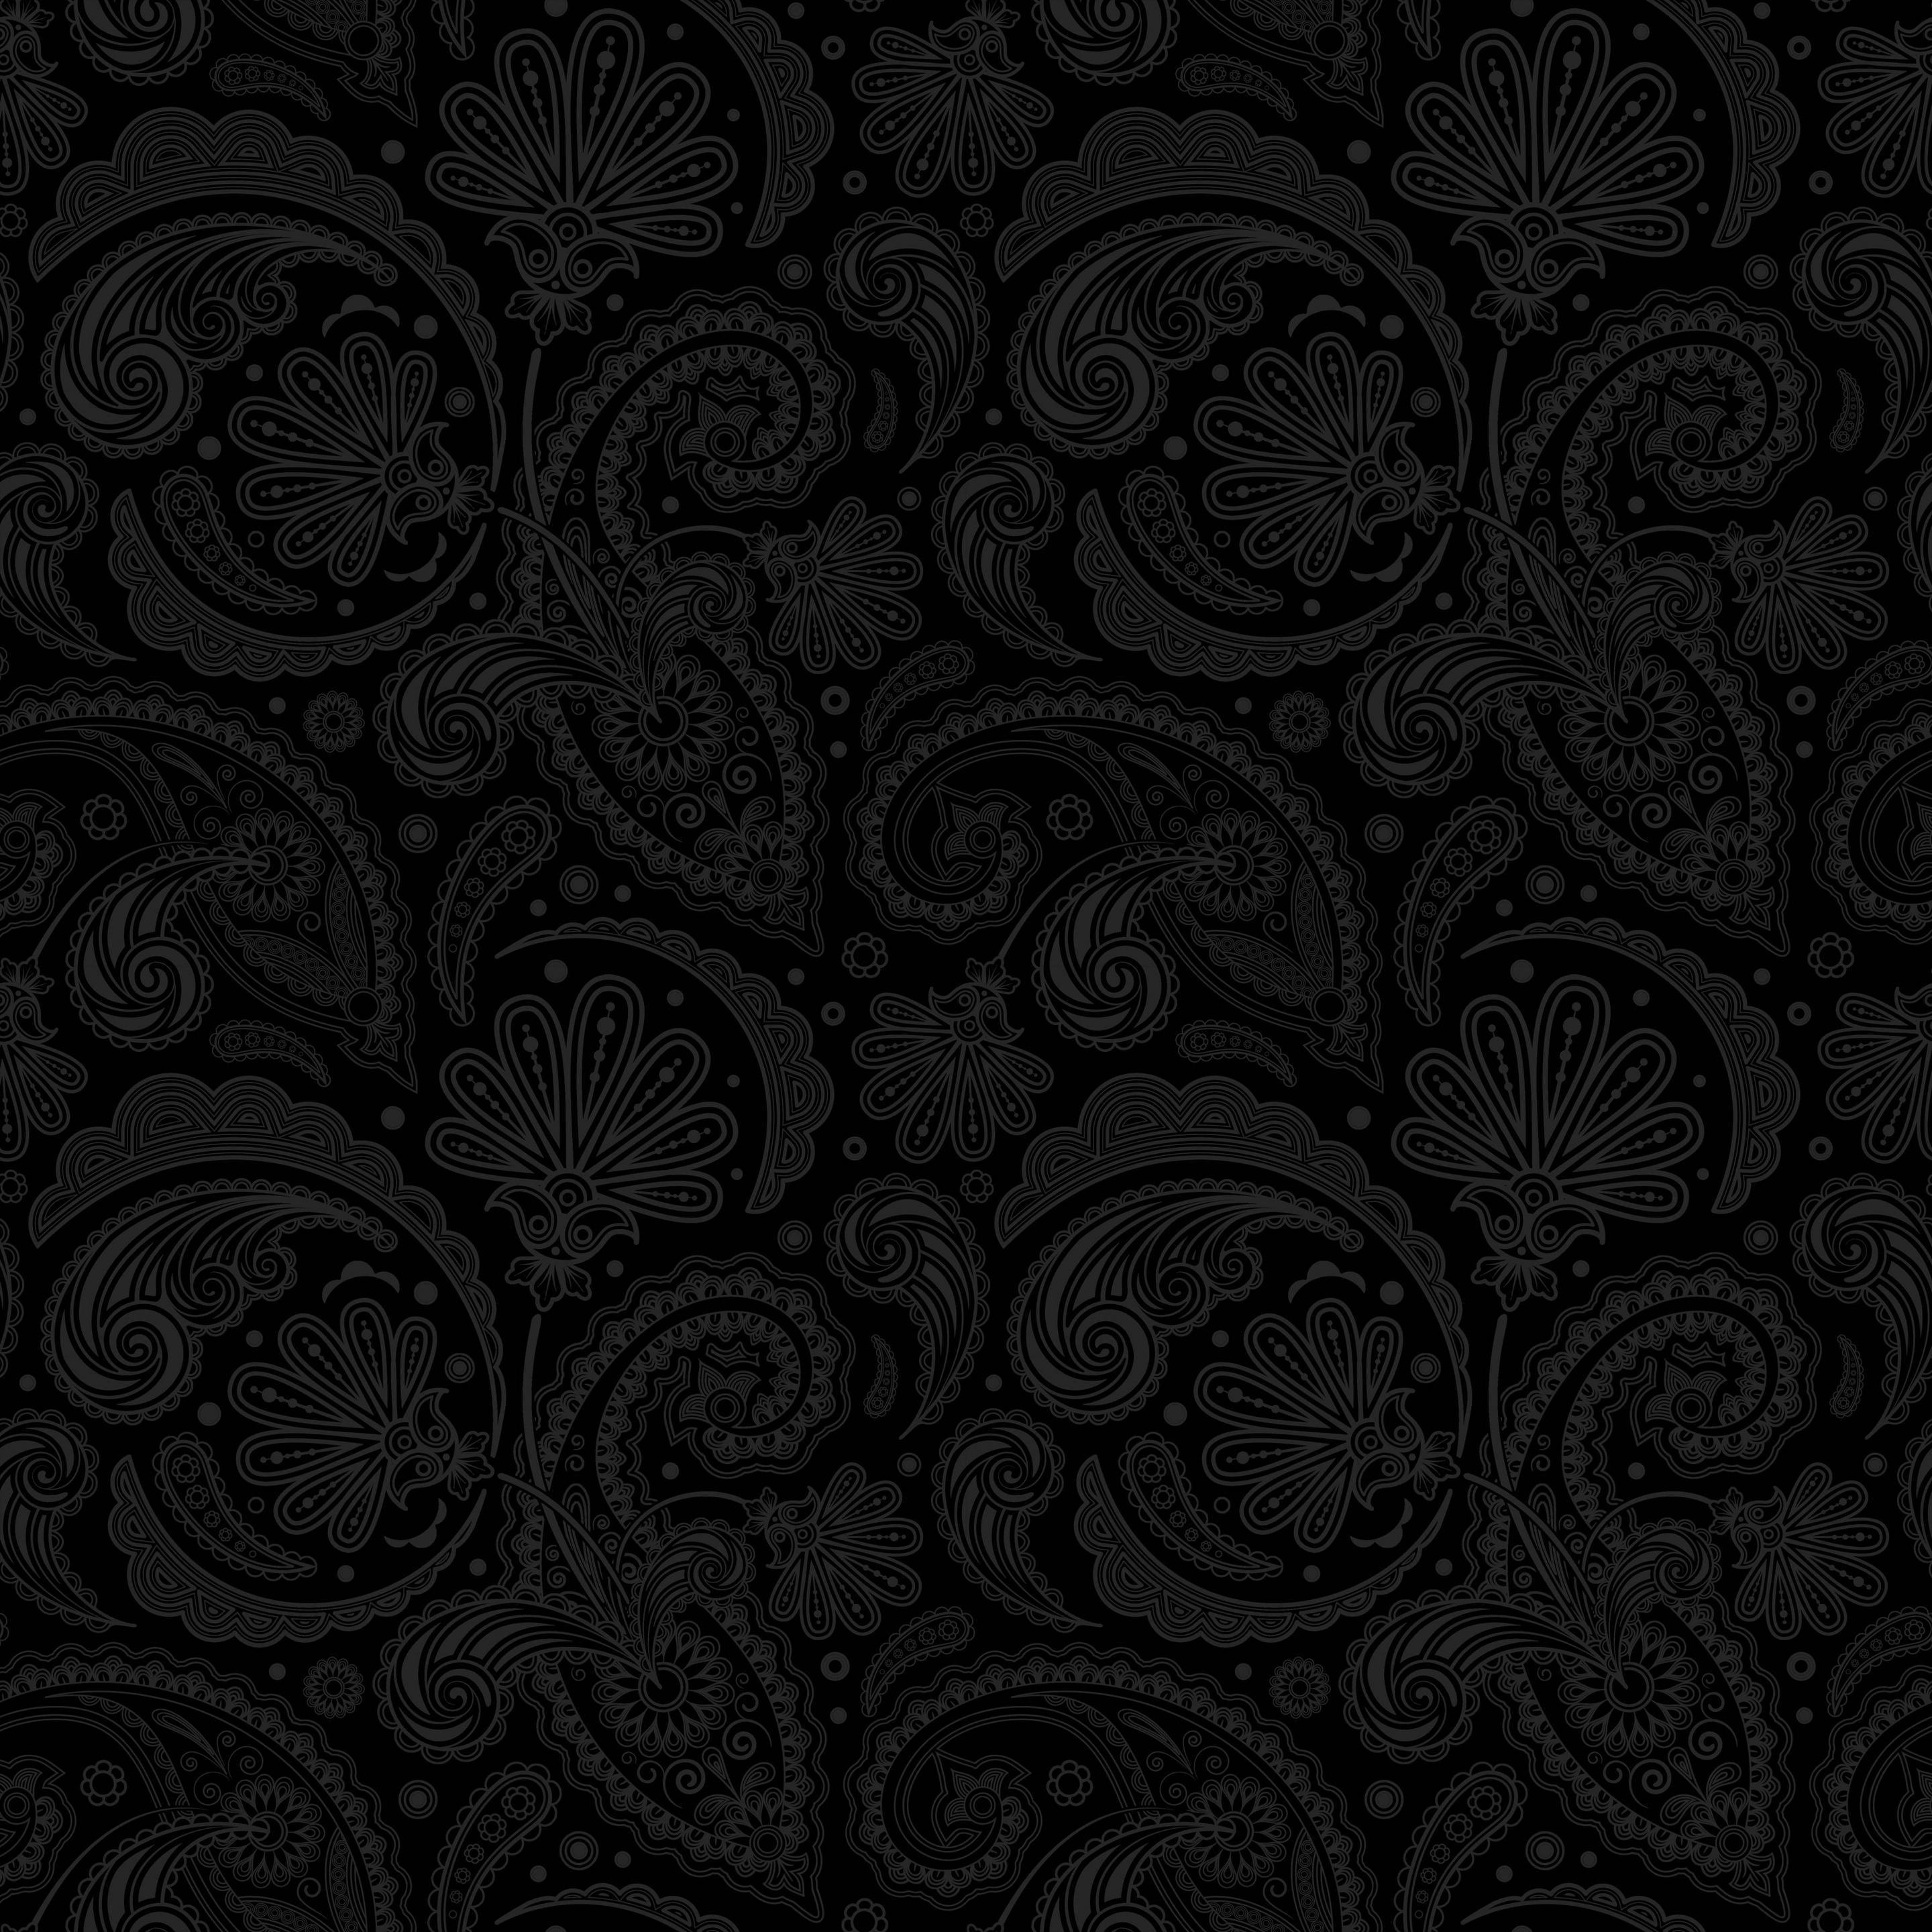 Paisley Iphone Wallpapers Top Free Paisley Iphone Backgrounds Wallpaperaccess 6268